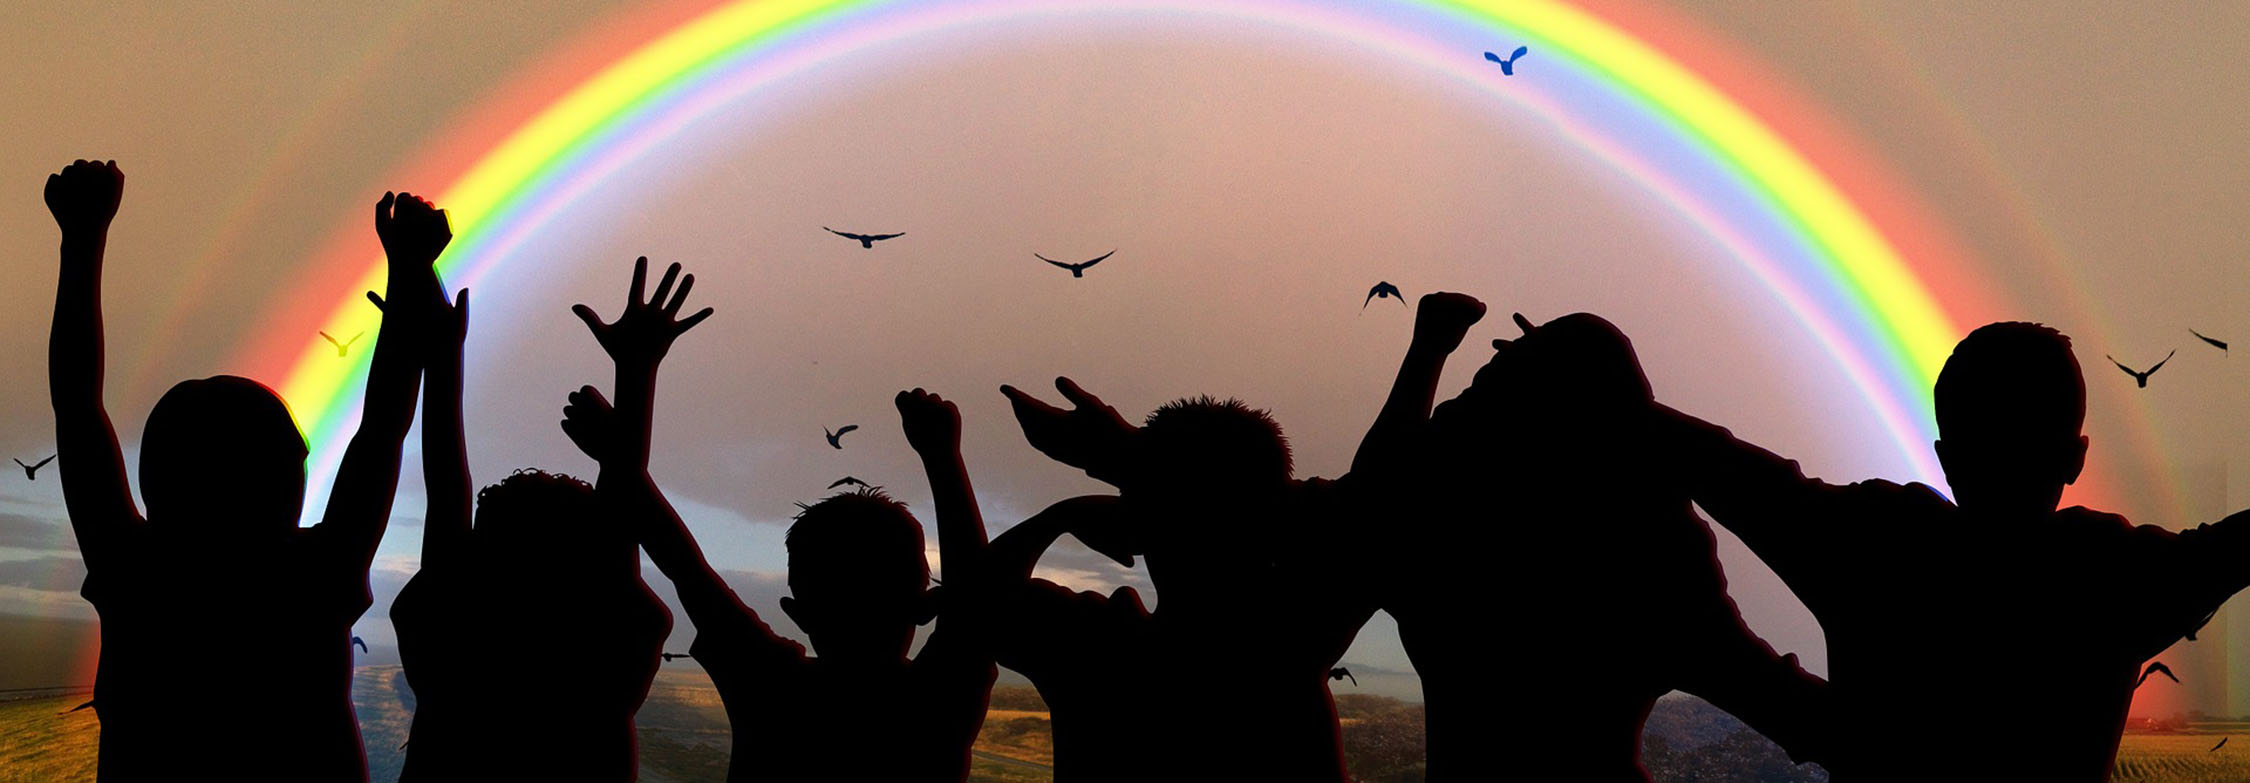 Silhouette of joyous children against a rainbow signifying nurturing, care and growth